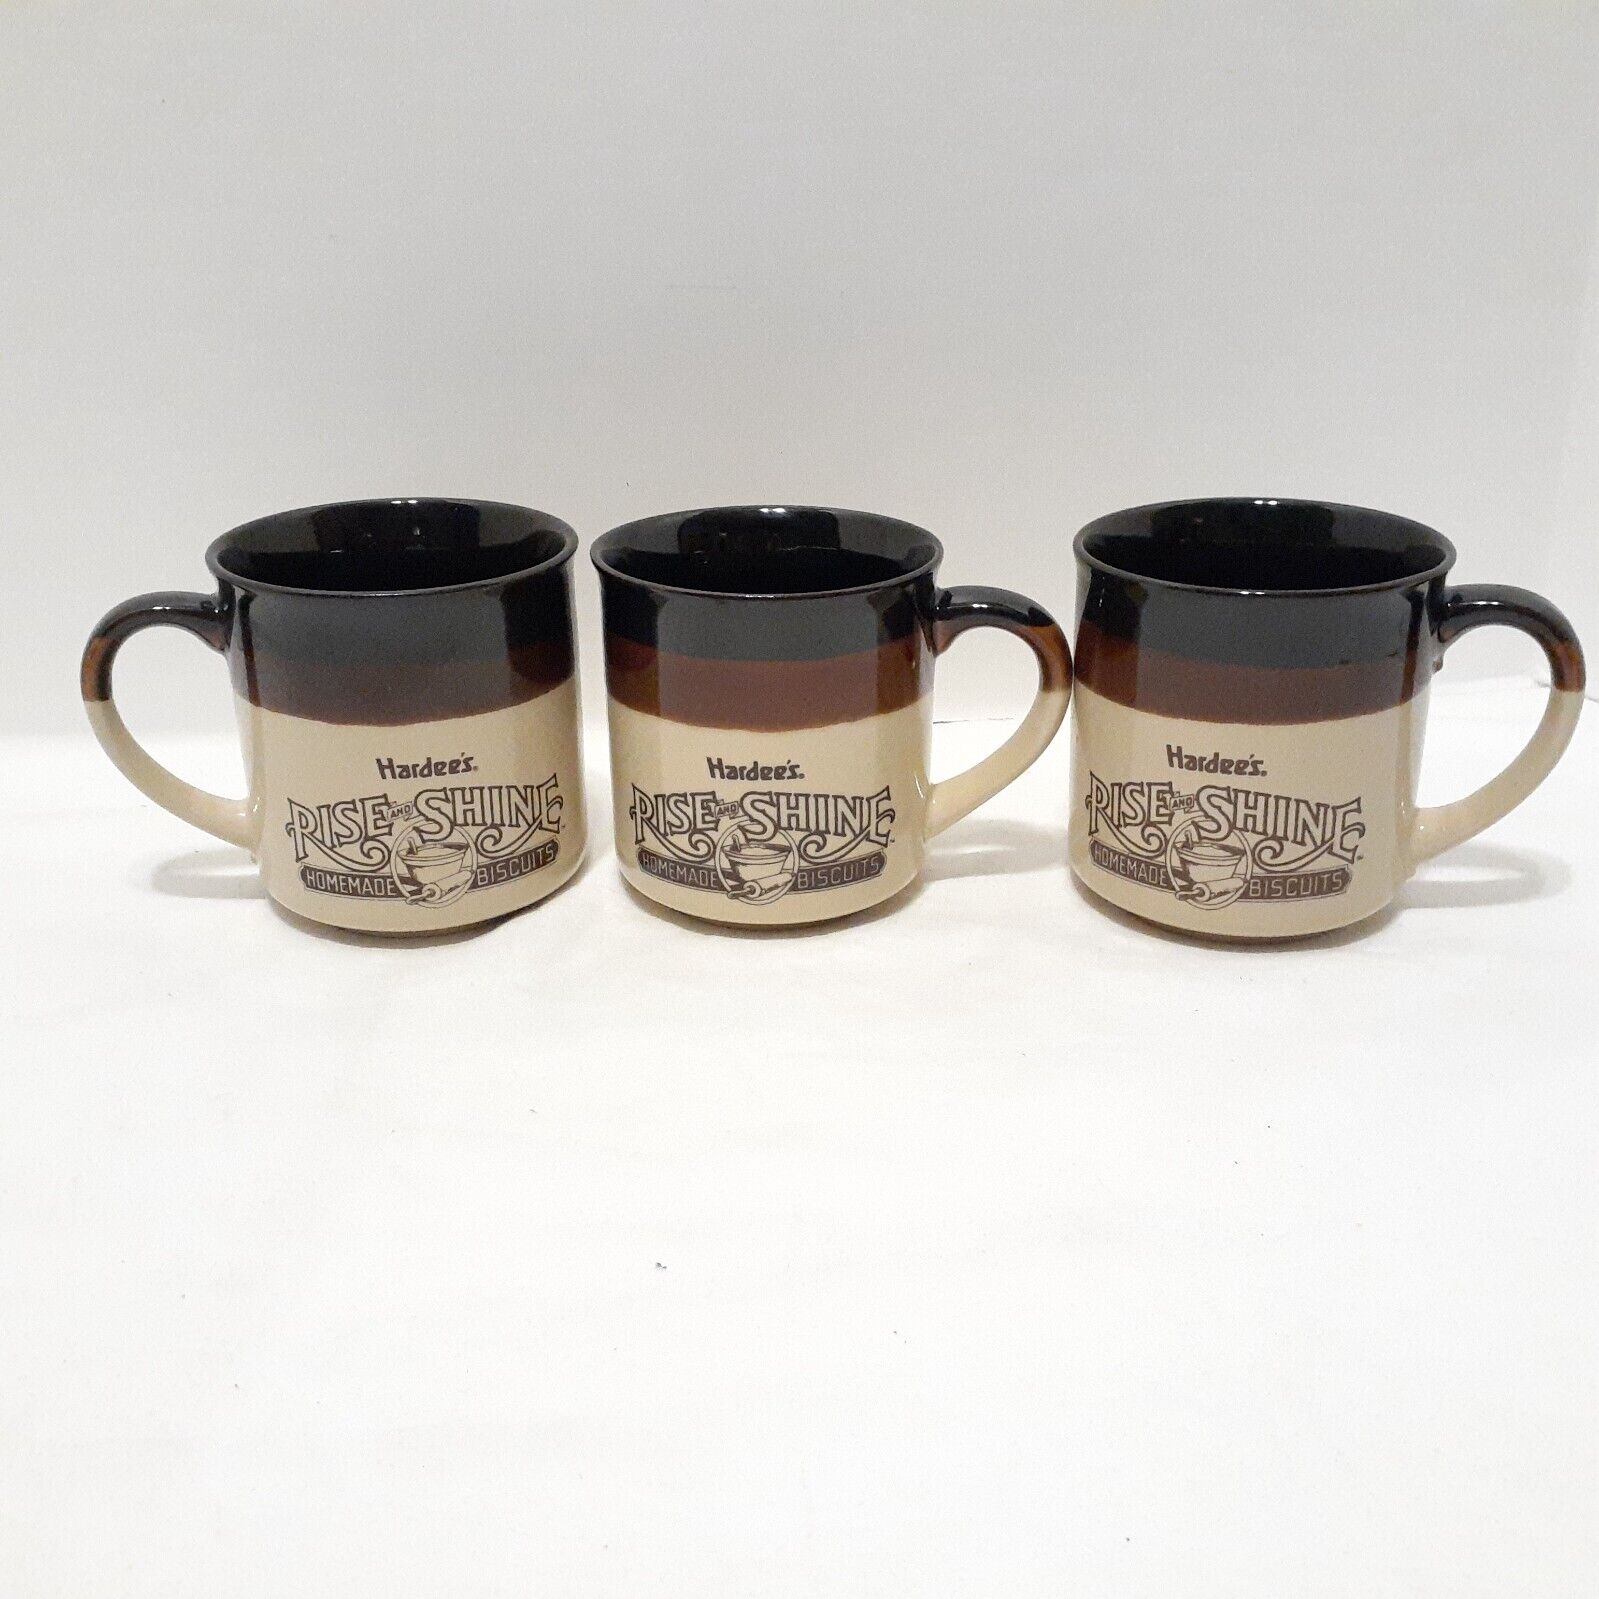 Vintage Set of 3 Hardee's 1989 Rise and Shine Coffee Mugs / Cups